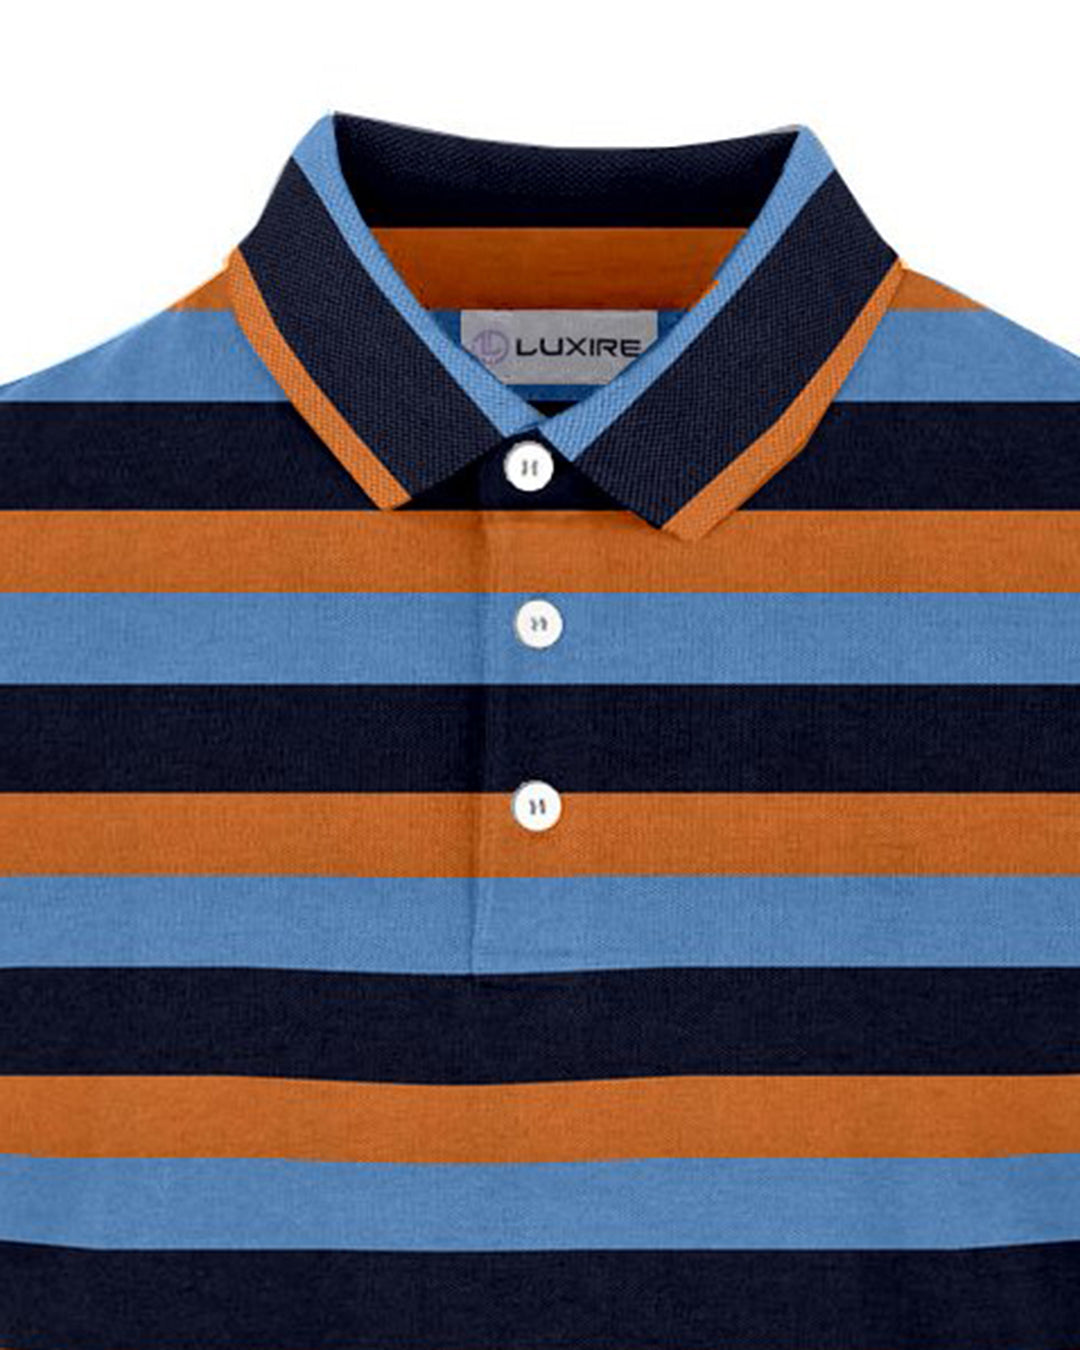 Collar of the custom oxford polo shirt for men by Luxire with navy blue and orange stripes